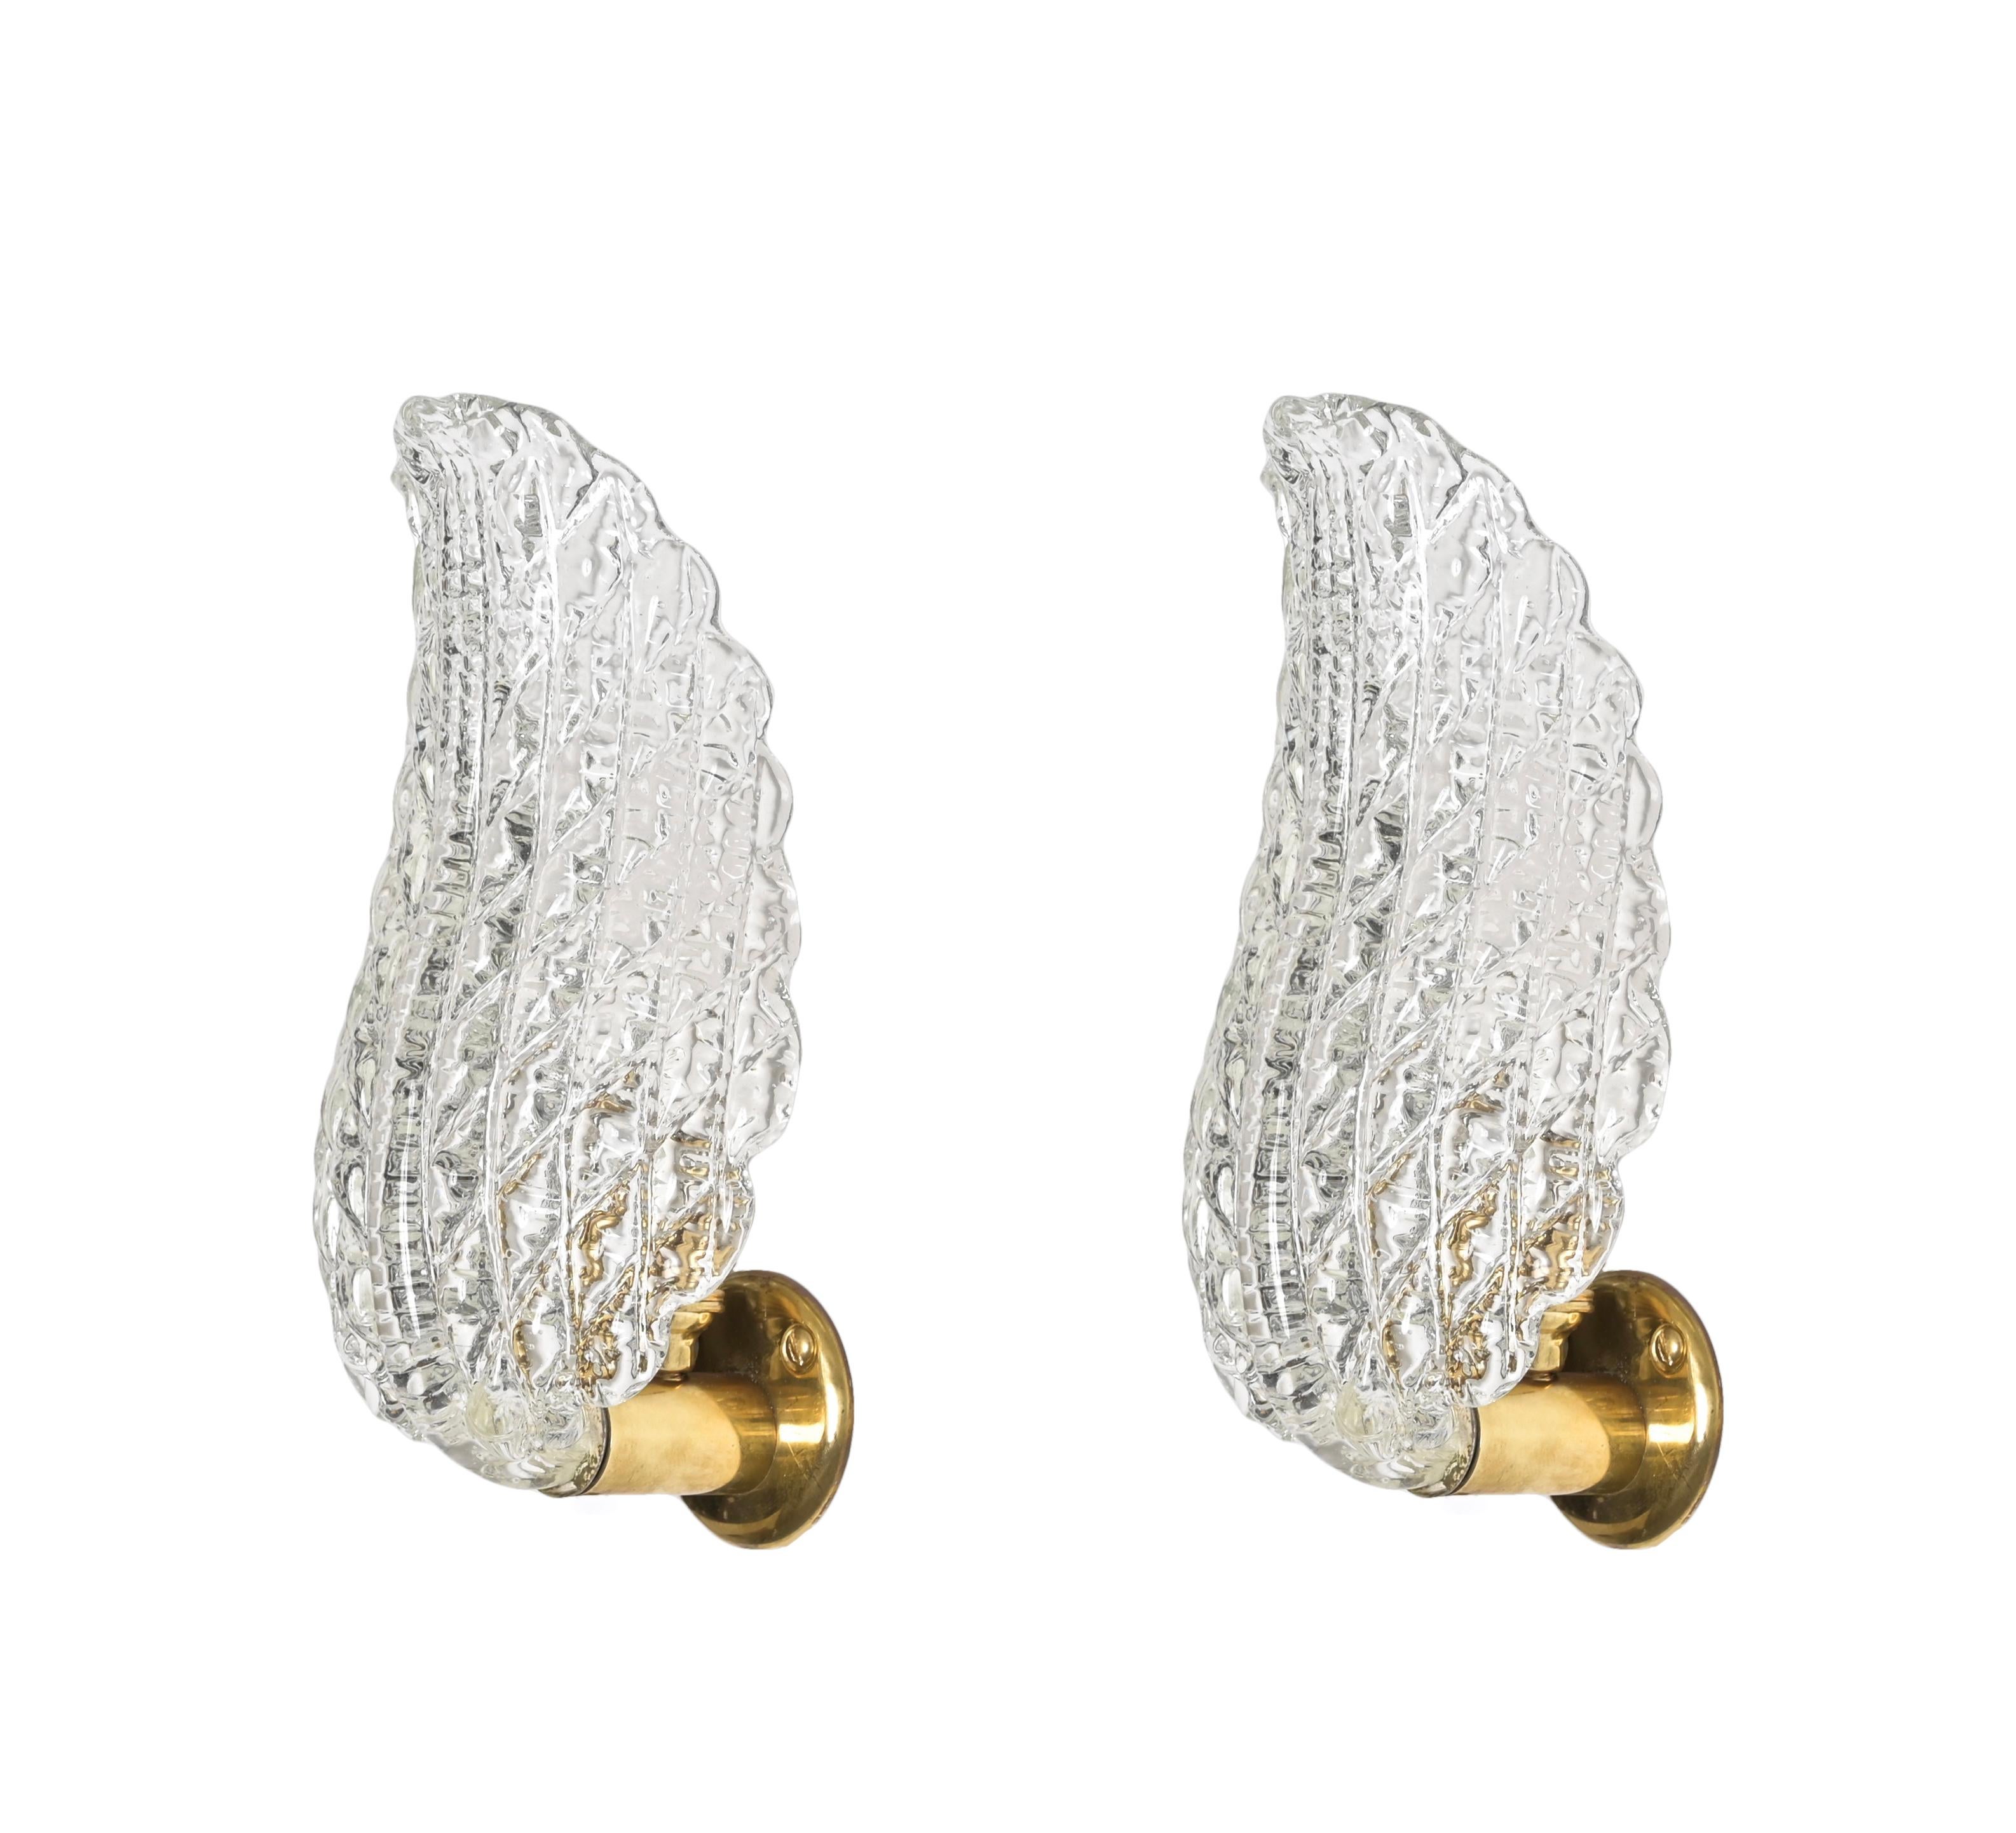 Pair of Midcentury Murano Glass and Brass Leaf Sconces, by Barovier, Italy 1950s For Sale 8